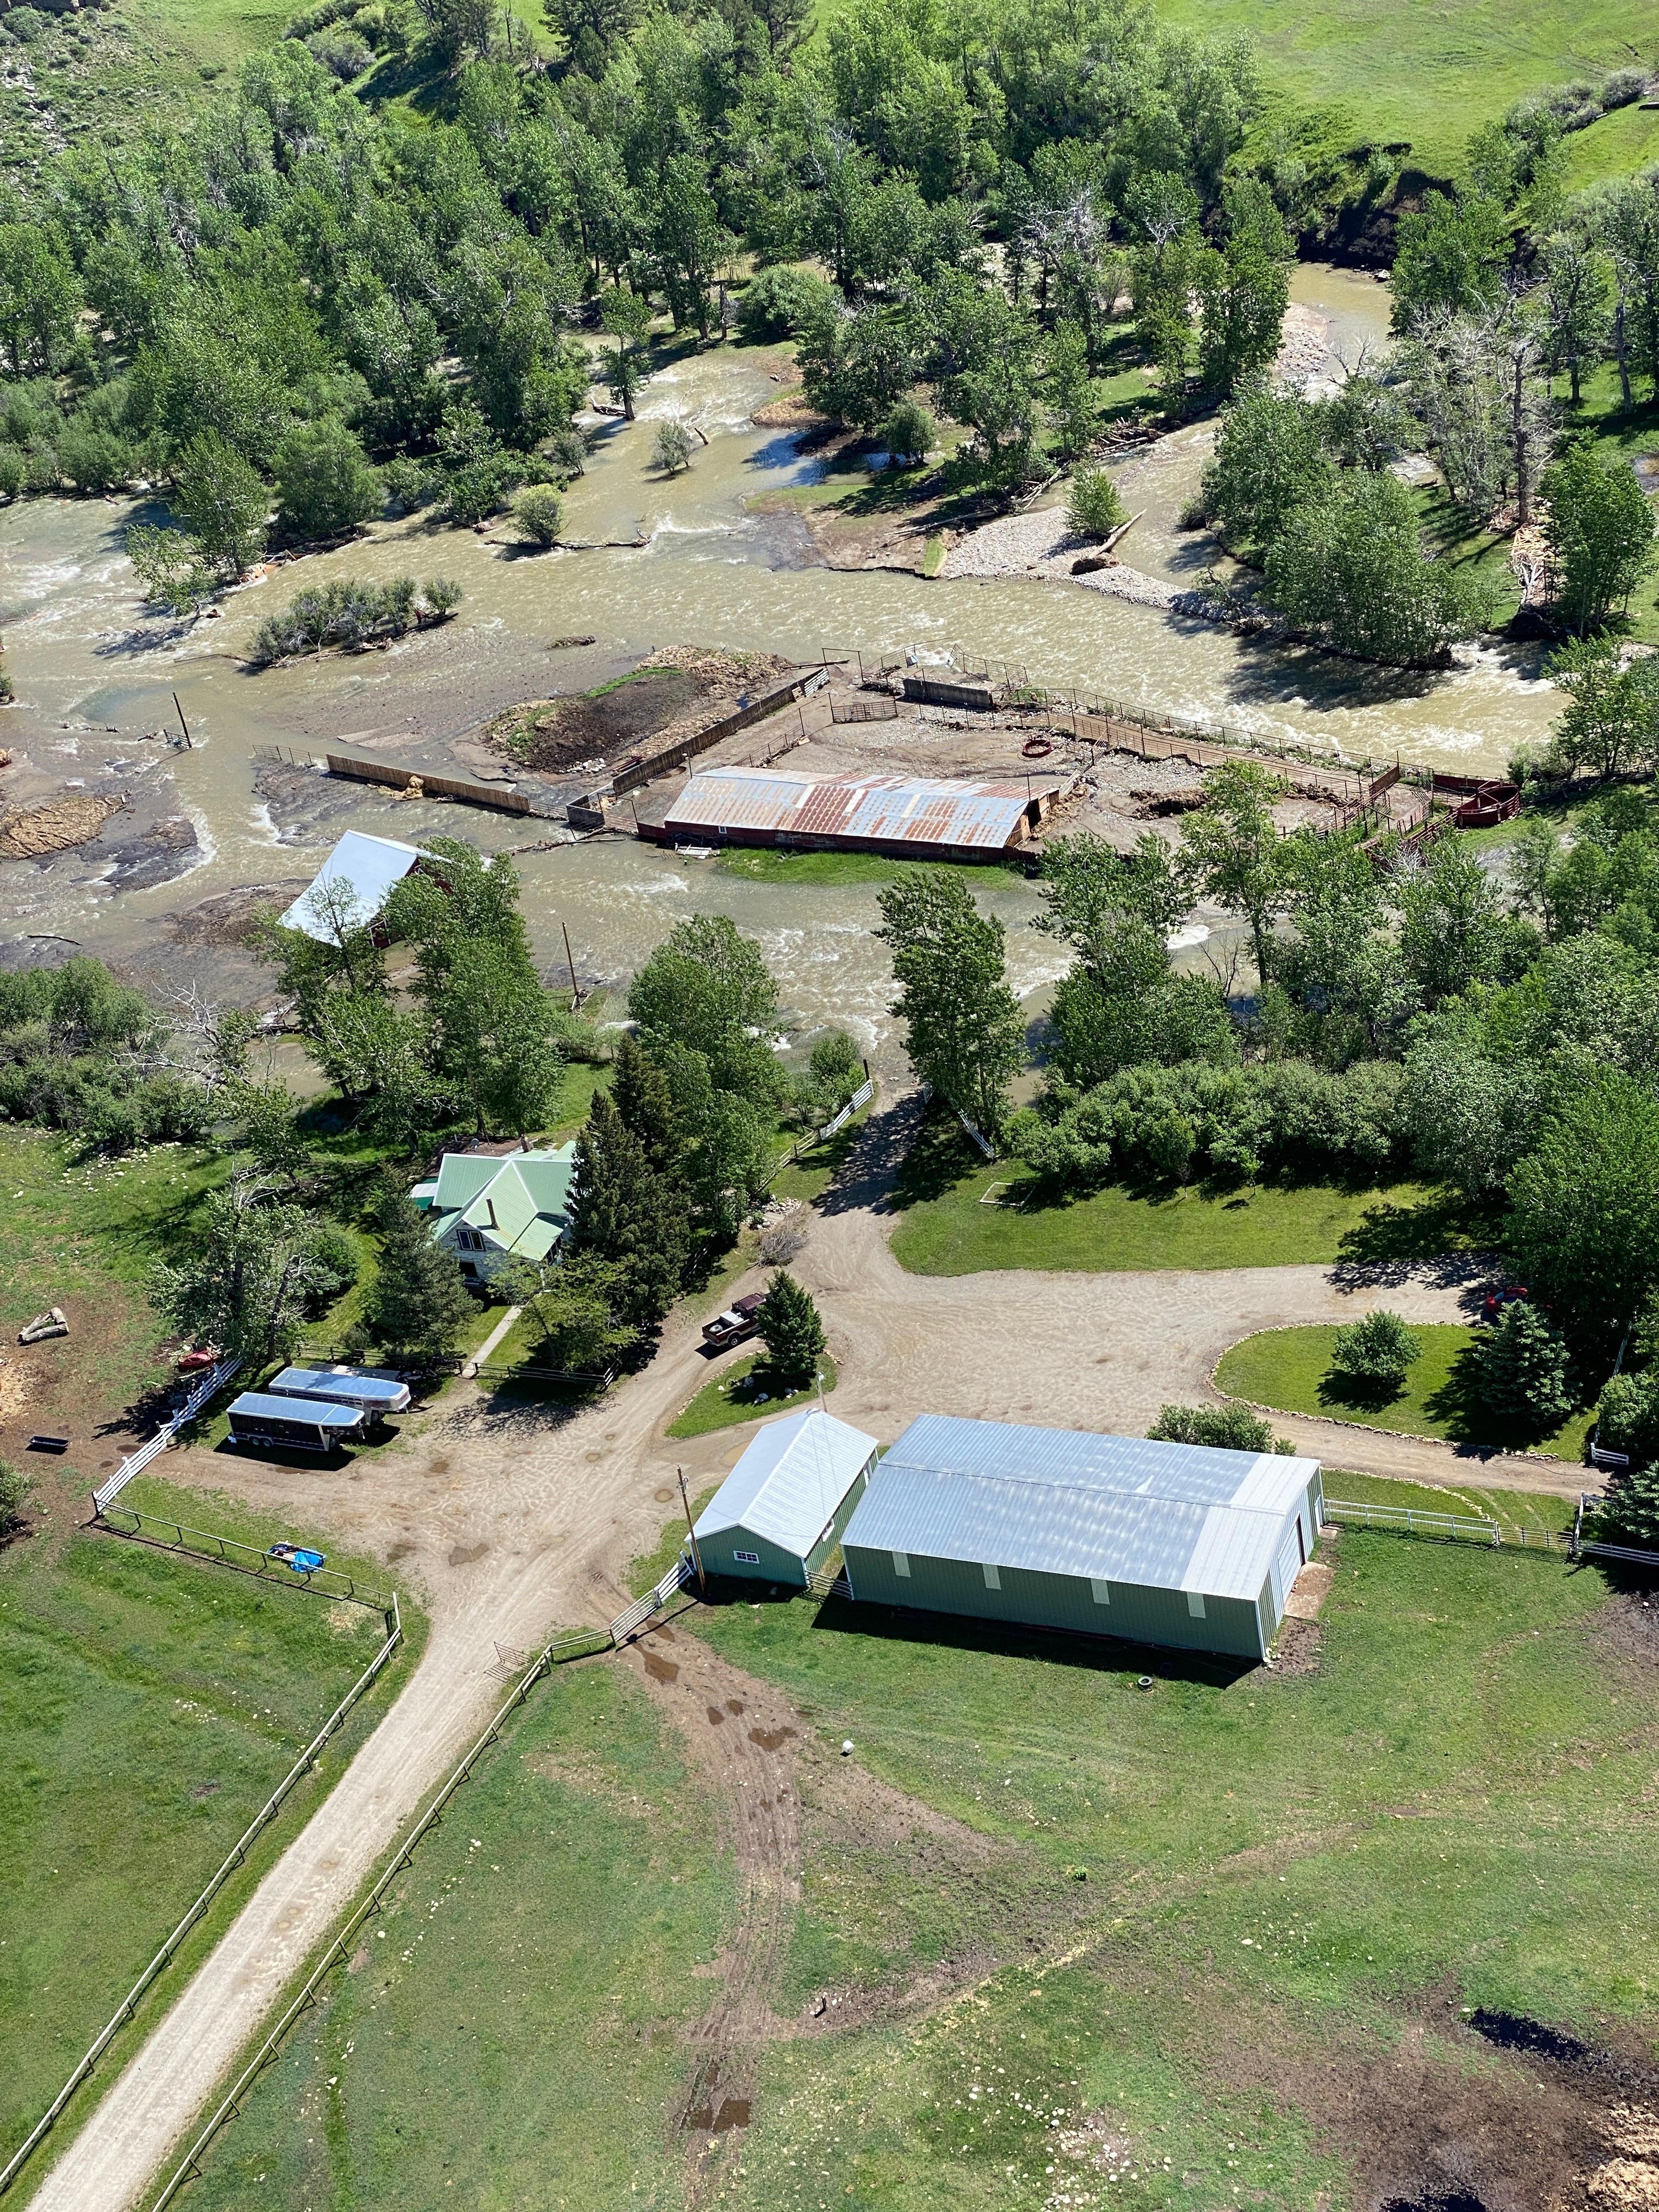 River out of its banks running from upper right to lower left. Some partially submerged farm buildings in upper portion of image; partially submerged, broken roof center left.